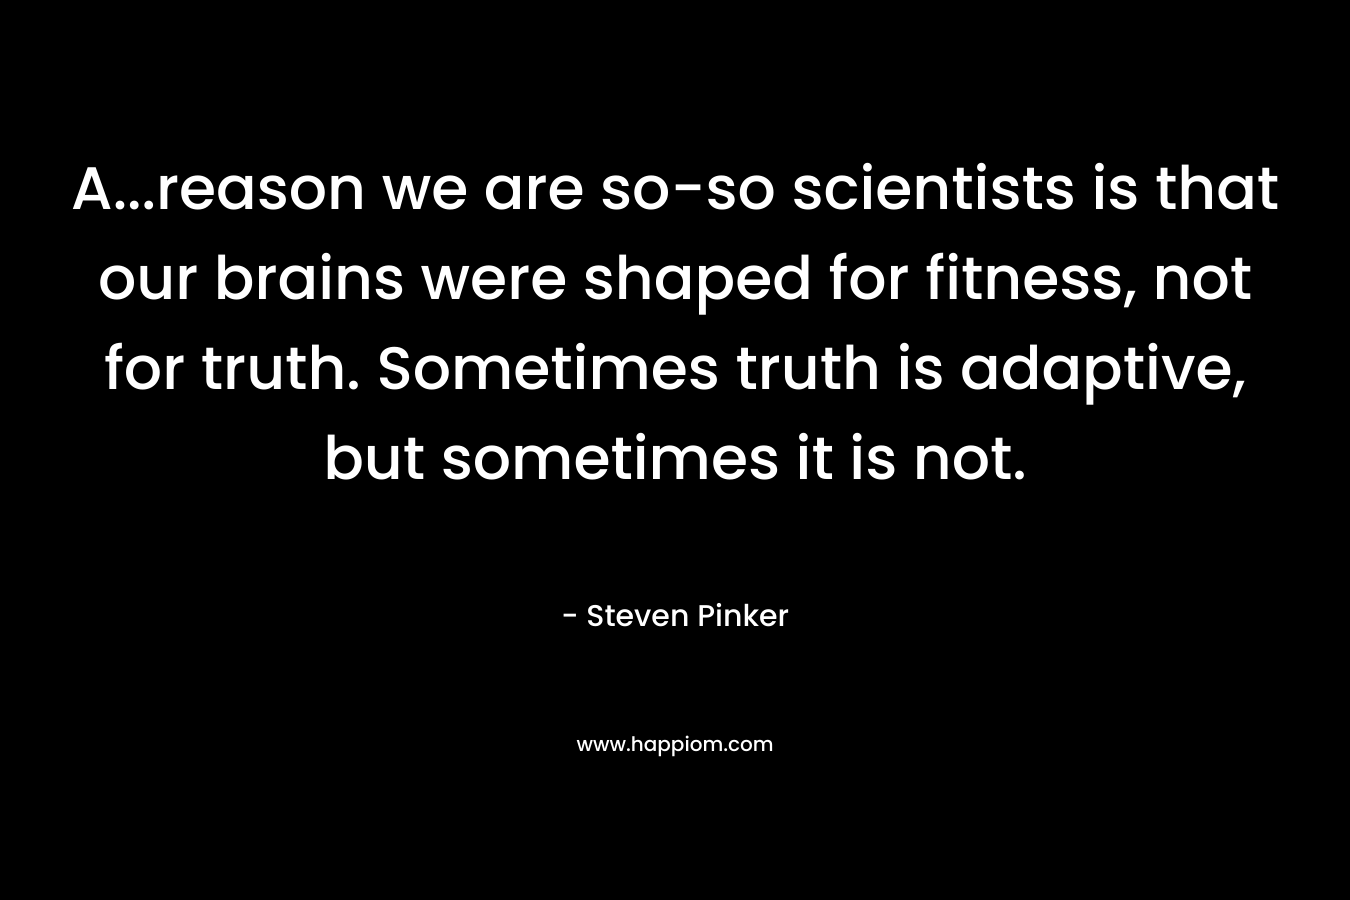 A...reason we are so-so scientists is that our brains were shaped for fitness, not for truth. Sometimes truth is adaptive, but sometimes it is not.